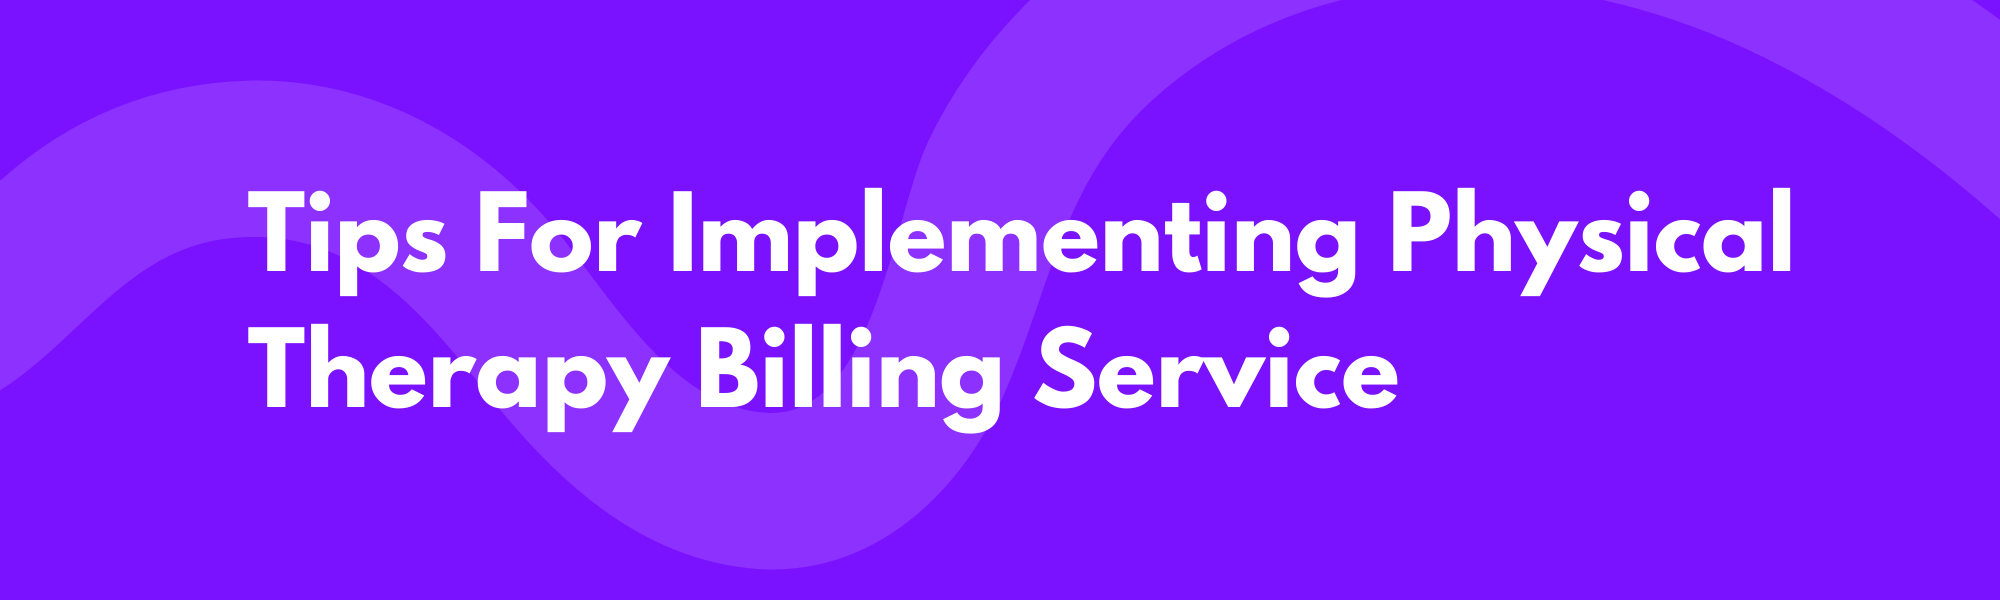 Tips For Implementing Physical Therapy Billing Service